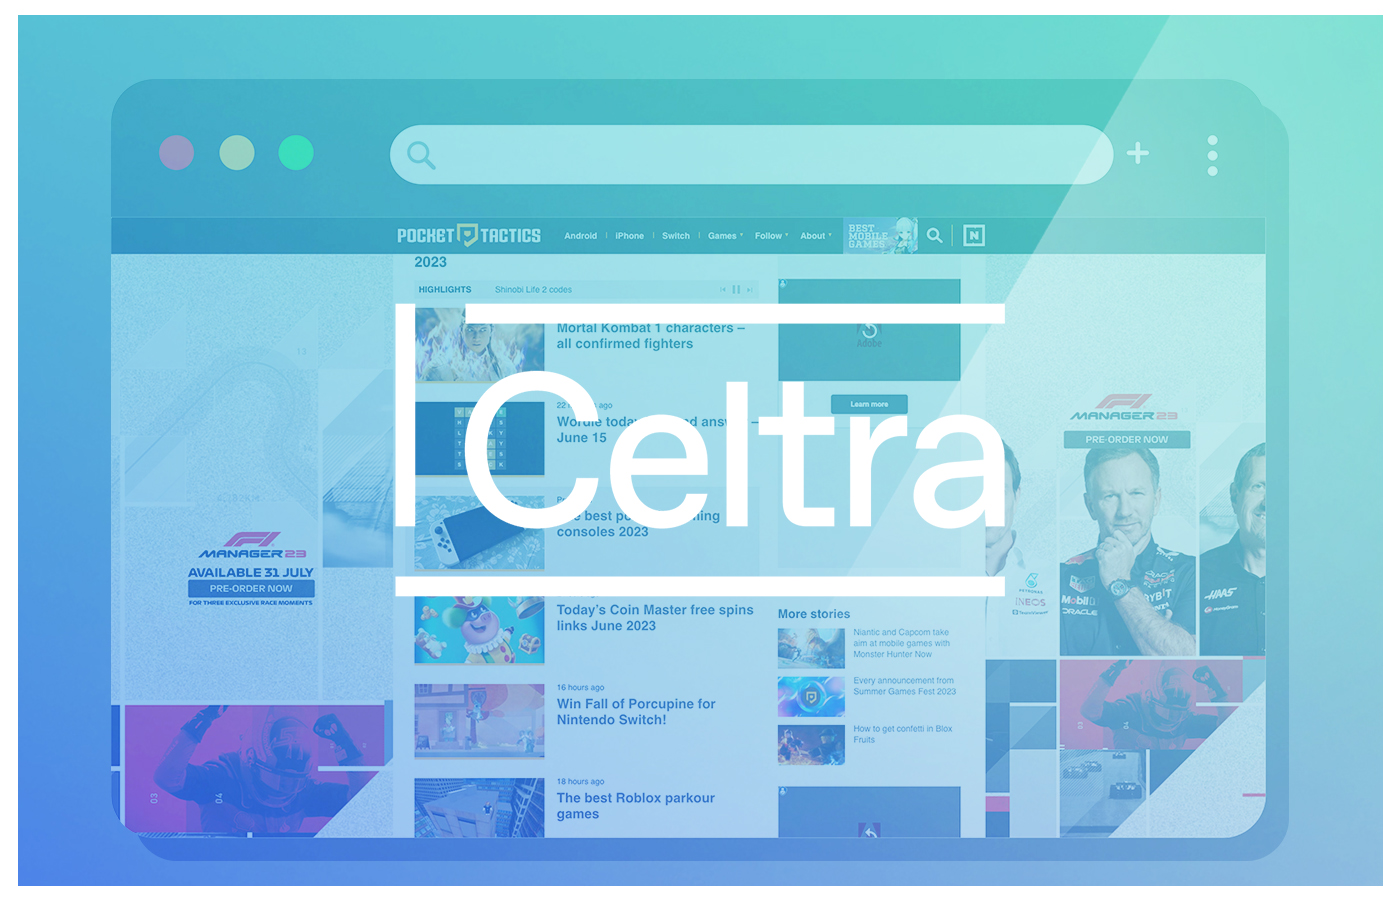 Powered by Celtra